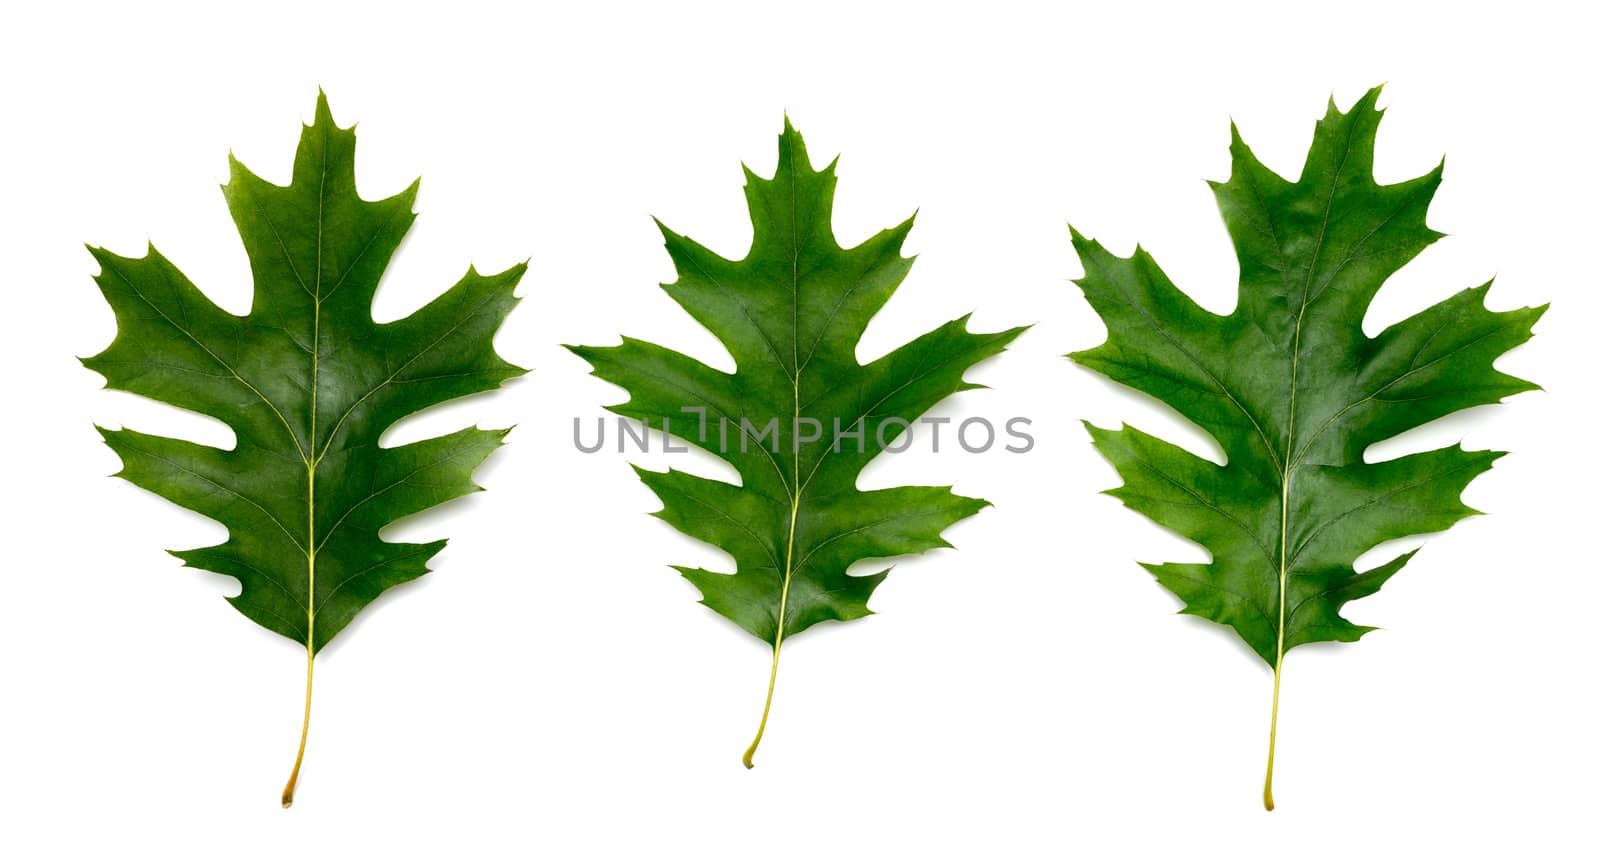 three oak tree leaves isolated on white by DNKSTUDIO